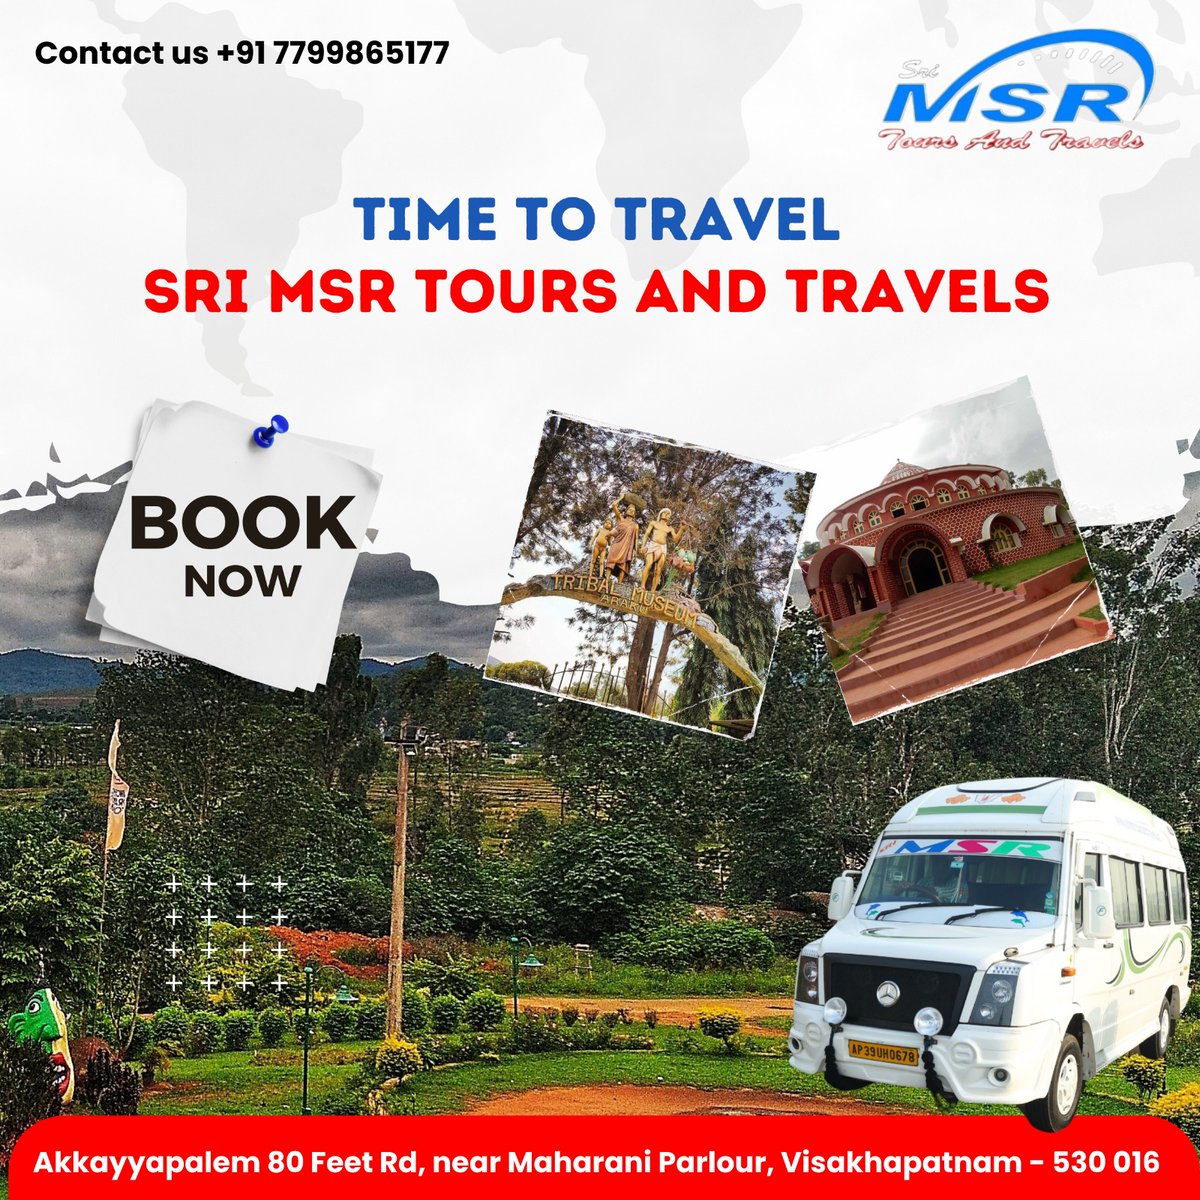 SRI MSR Tours and Travels – where every mile becomes a memory and every destination a discovery!

Book your trip today!
📞 +91 77998 65177

#ExploreWithSRI #MSRToursAndTravels #DiscoverYourWorld #WanderlustJourney #TravelGoalsAchieved #SeetheWorldWithSRI #AdventureAwaitsYou